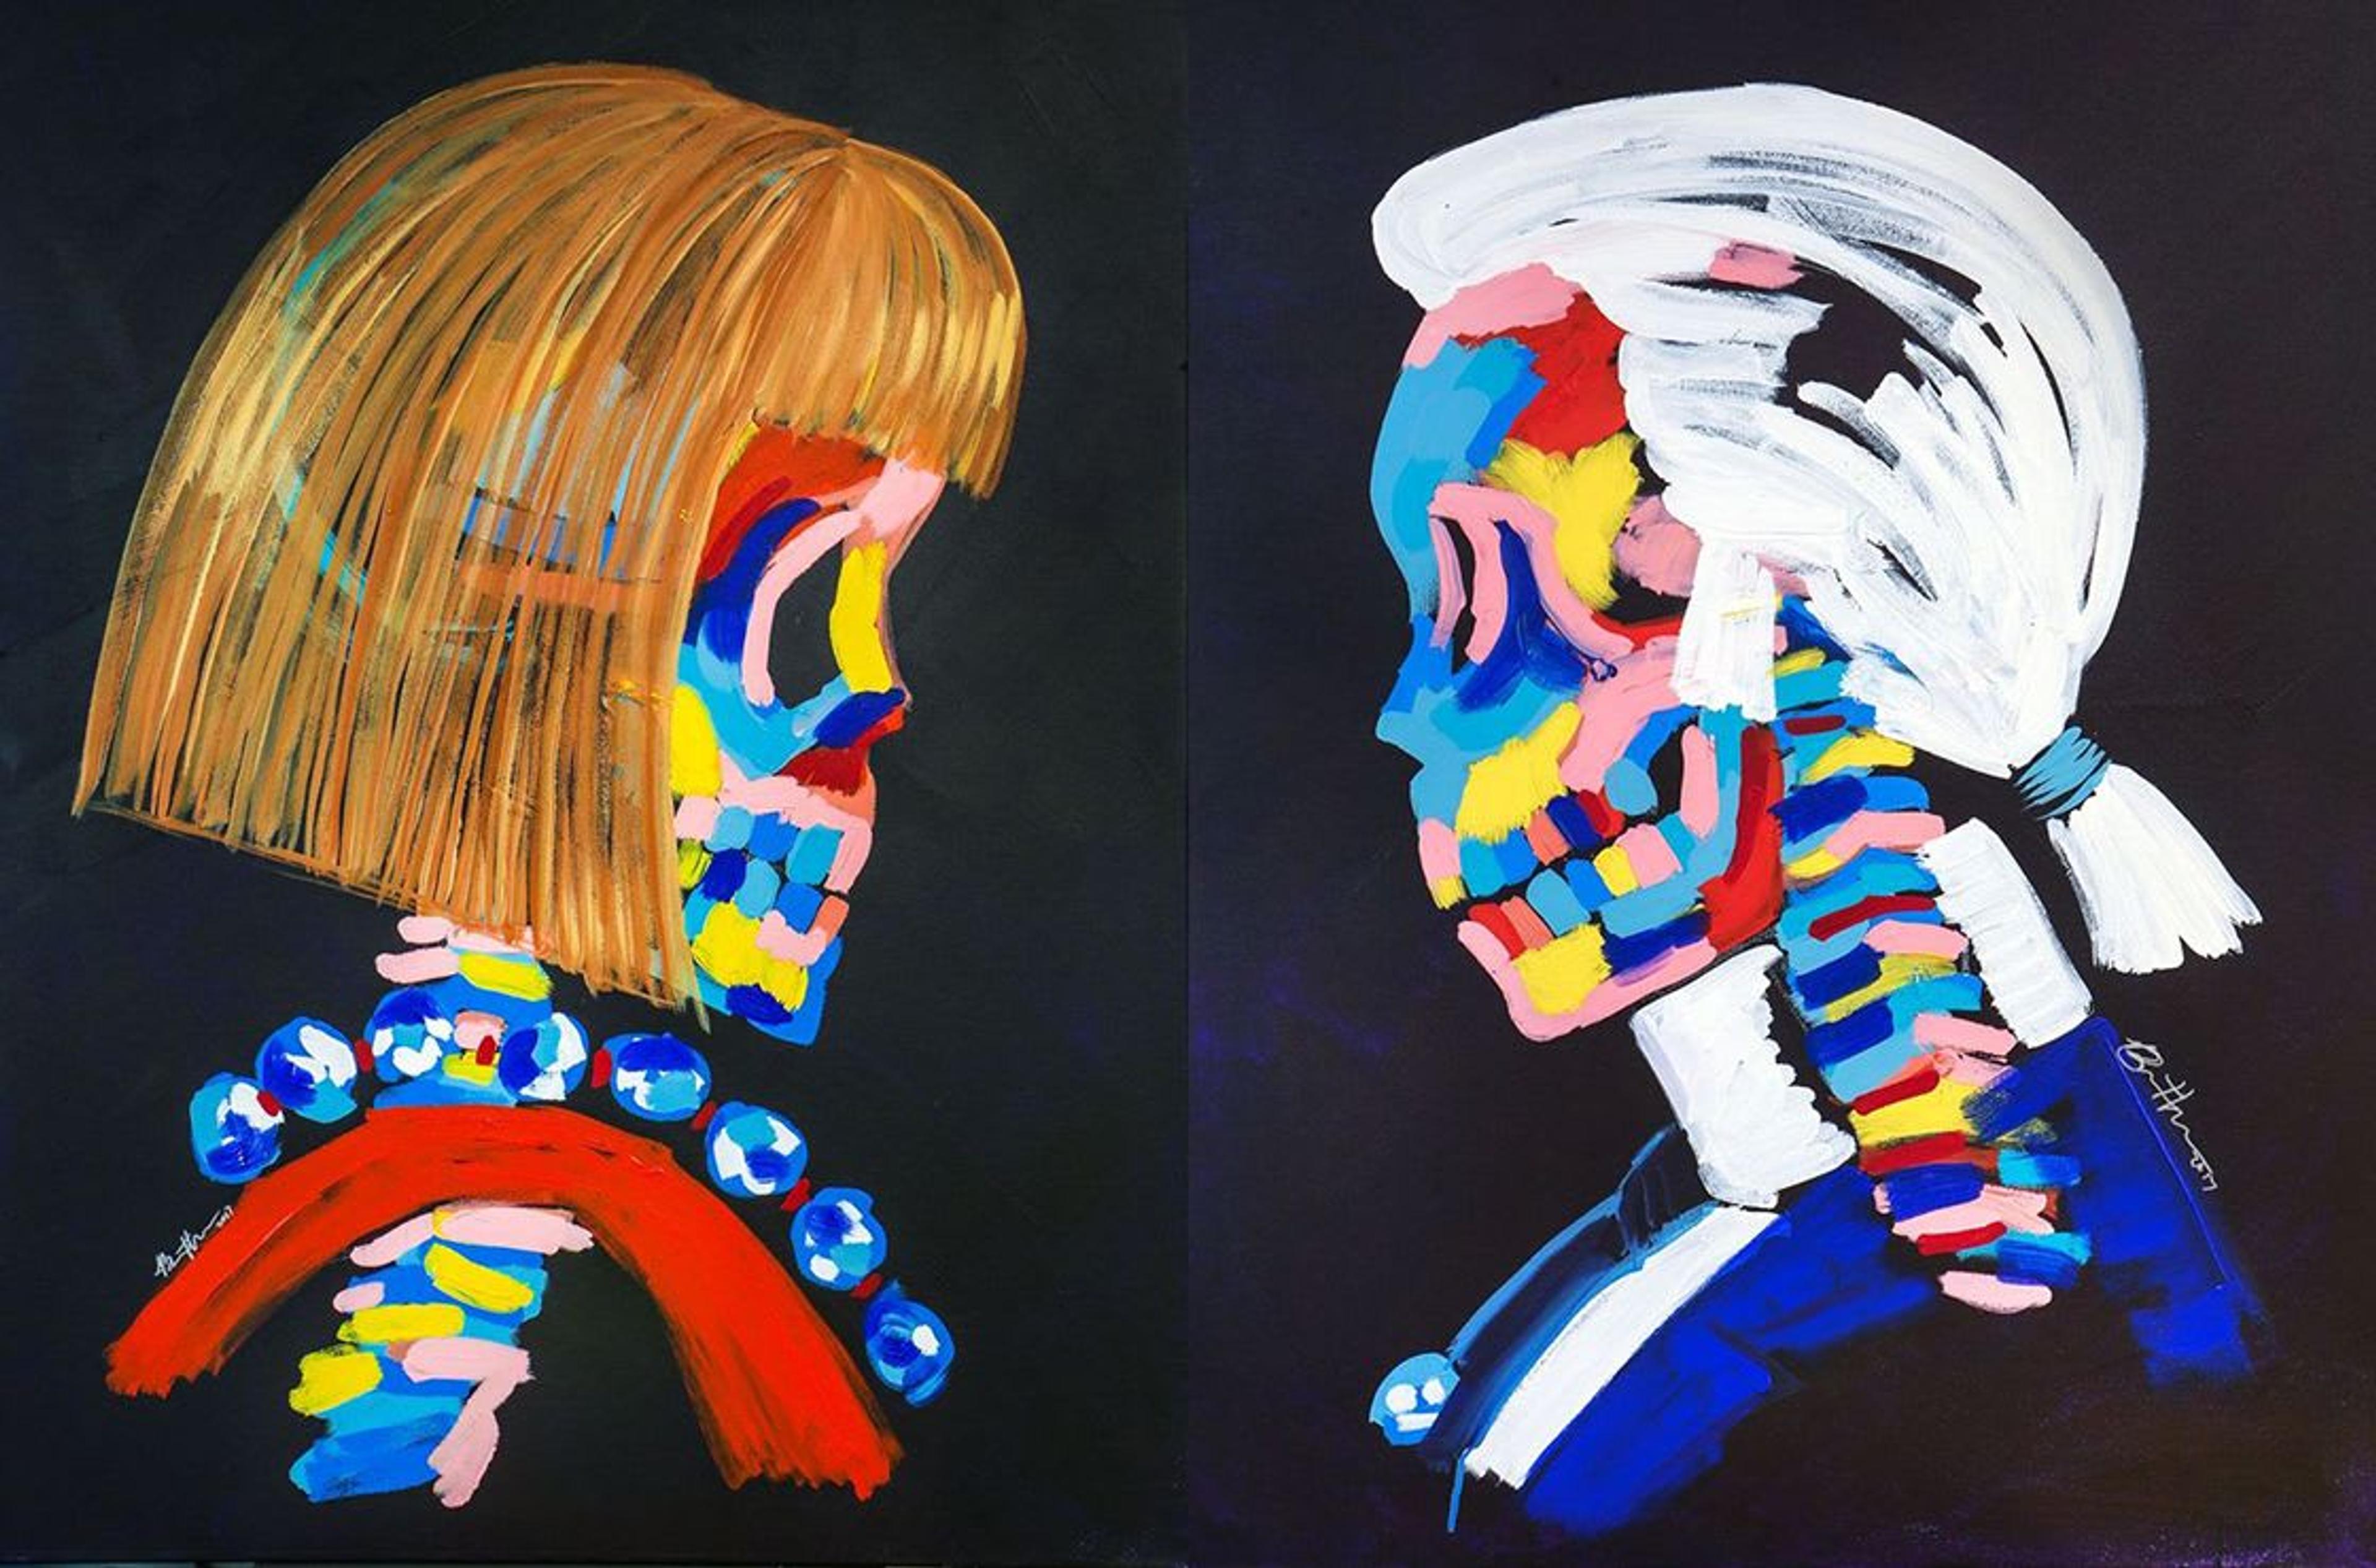  Karl Lagerfeld and Anna Wintour by Bradley Theodore. The Second Coming, Maddox Gallery.